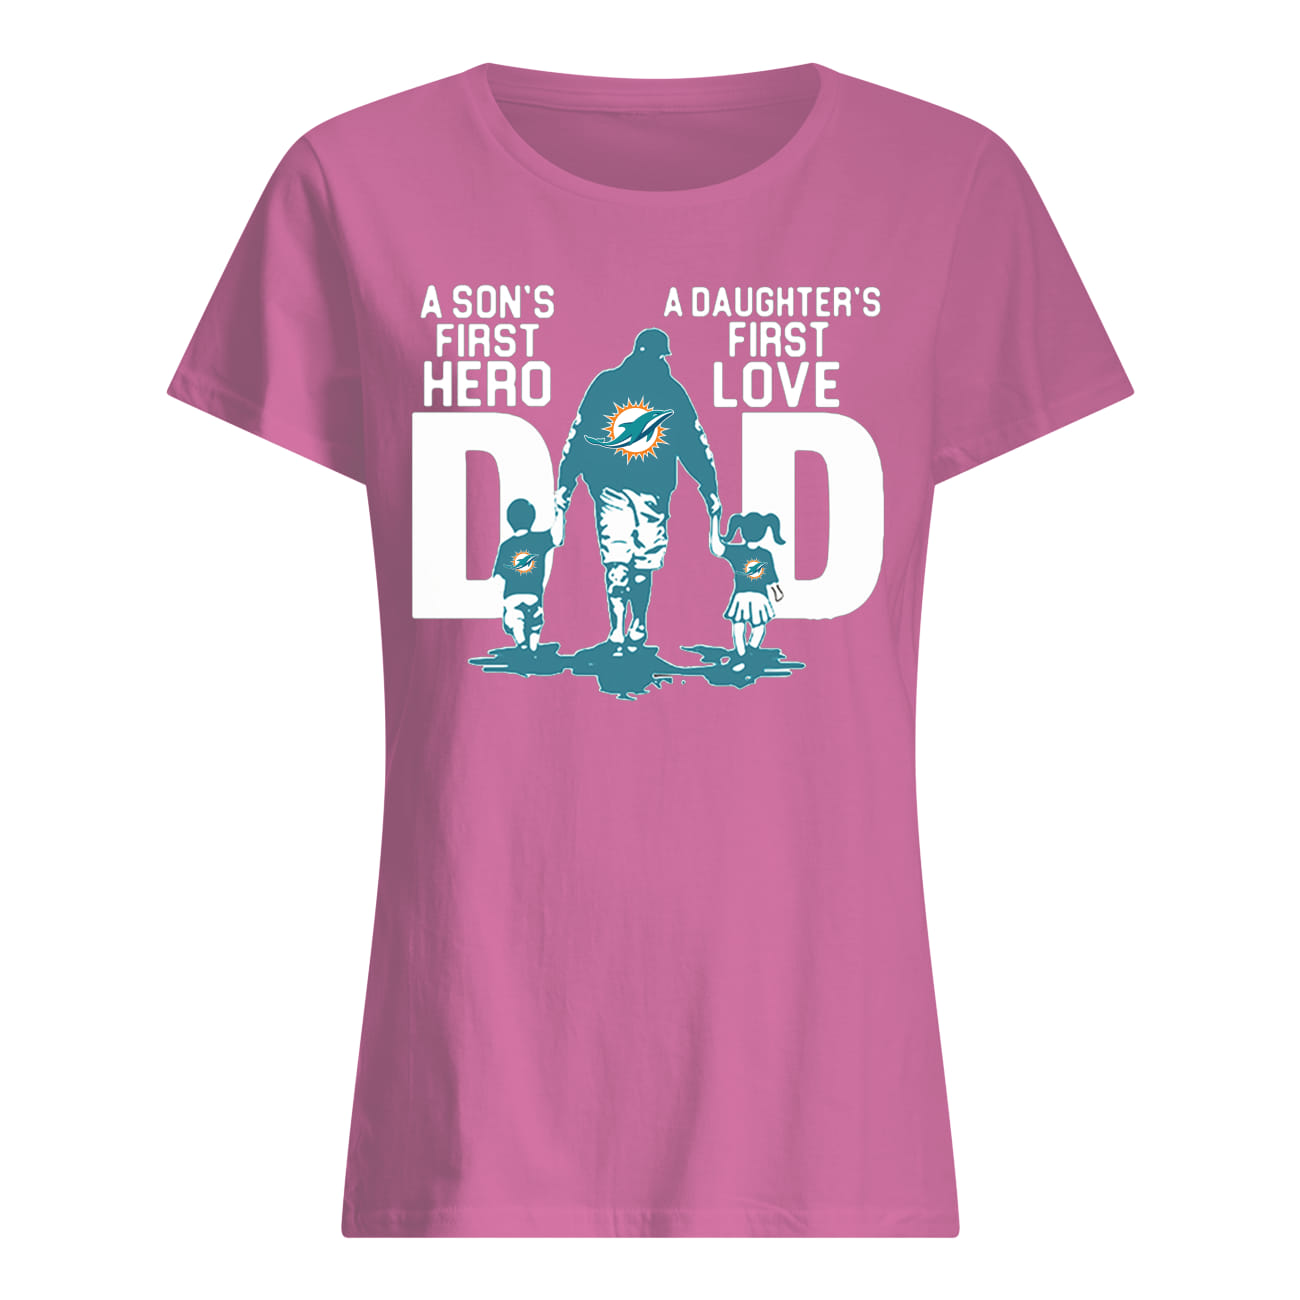 Miami dolphins dad a son's first hero a daughter's first love lady shirt